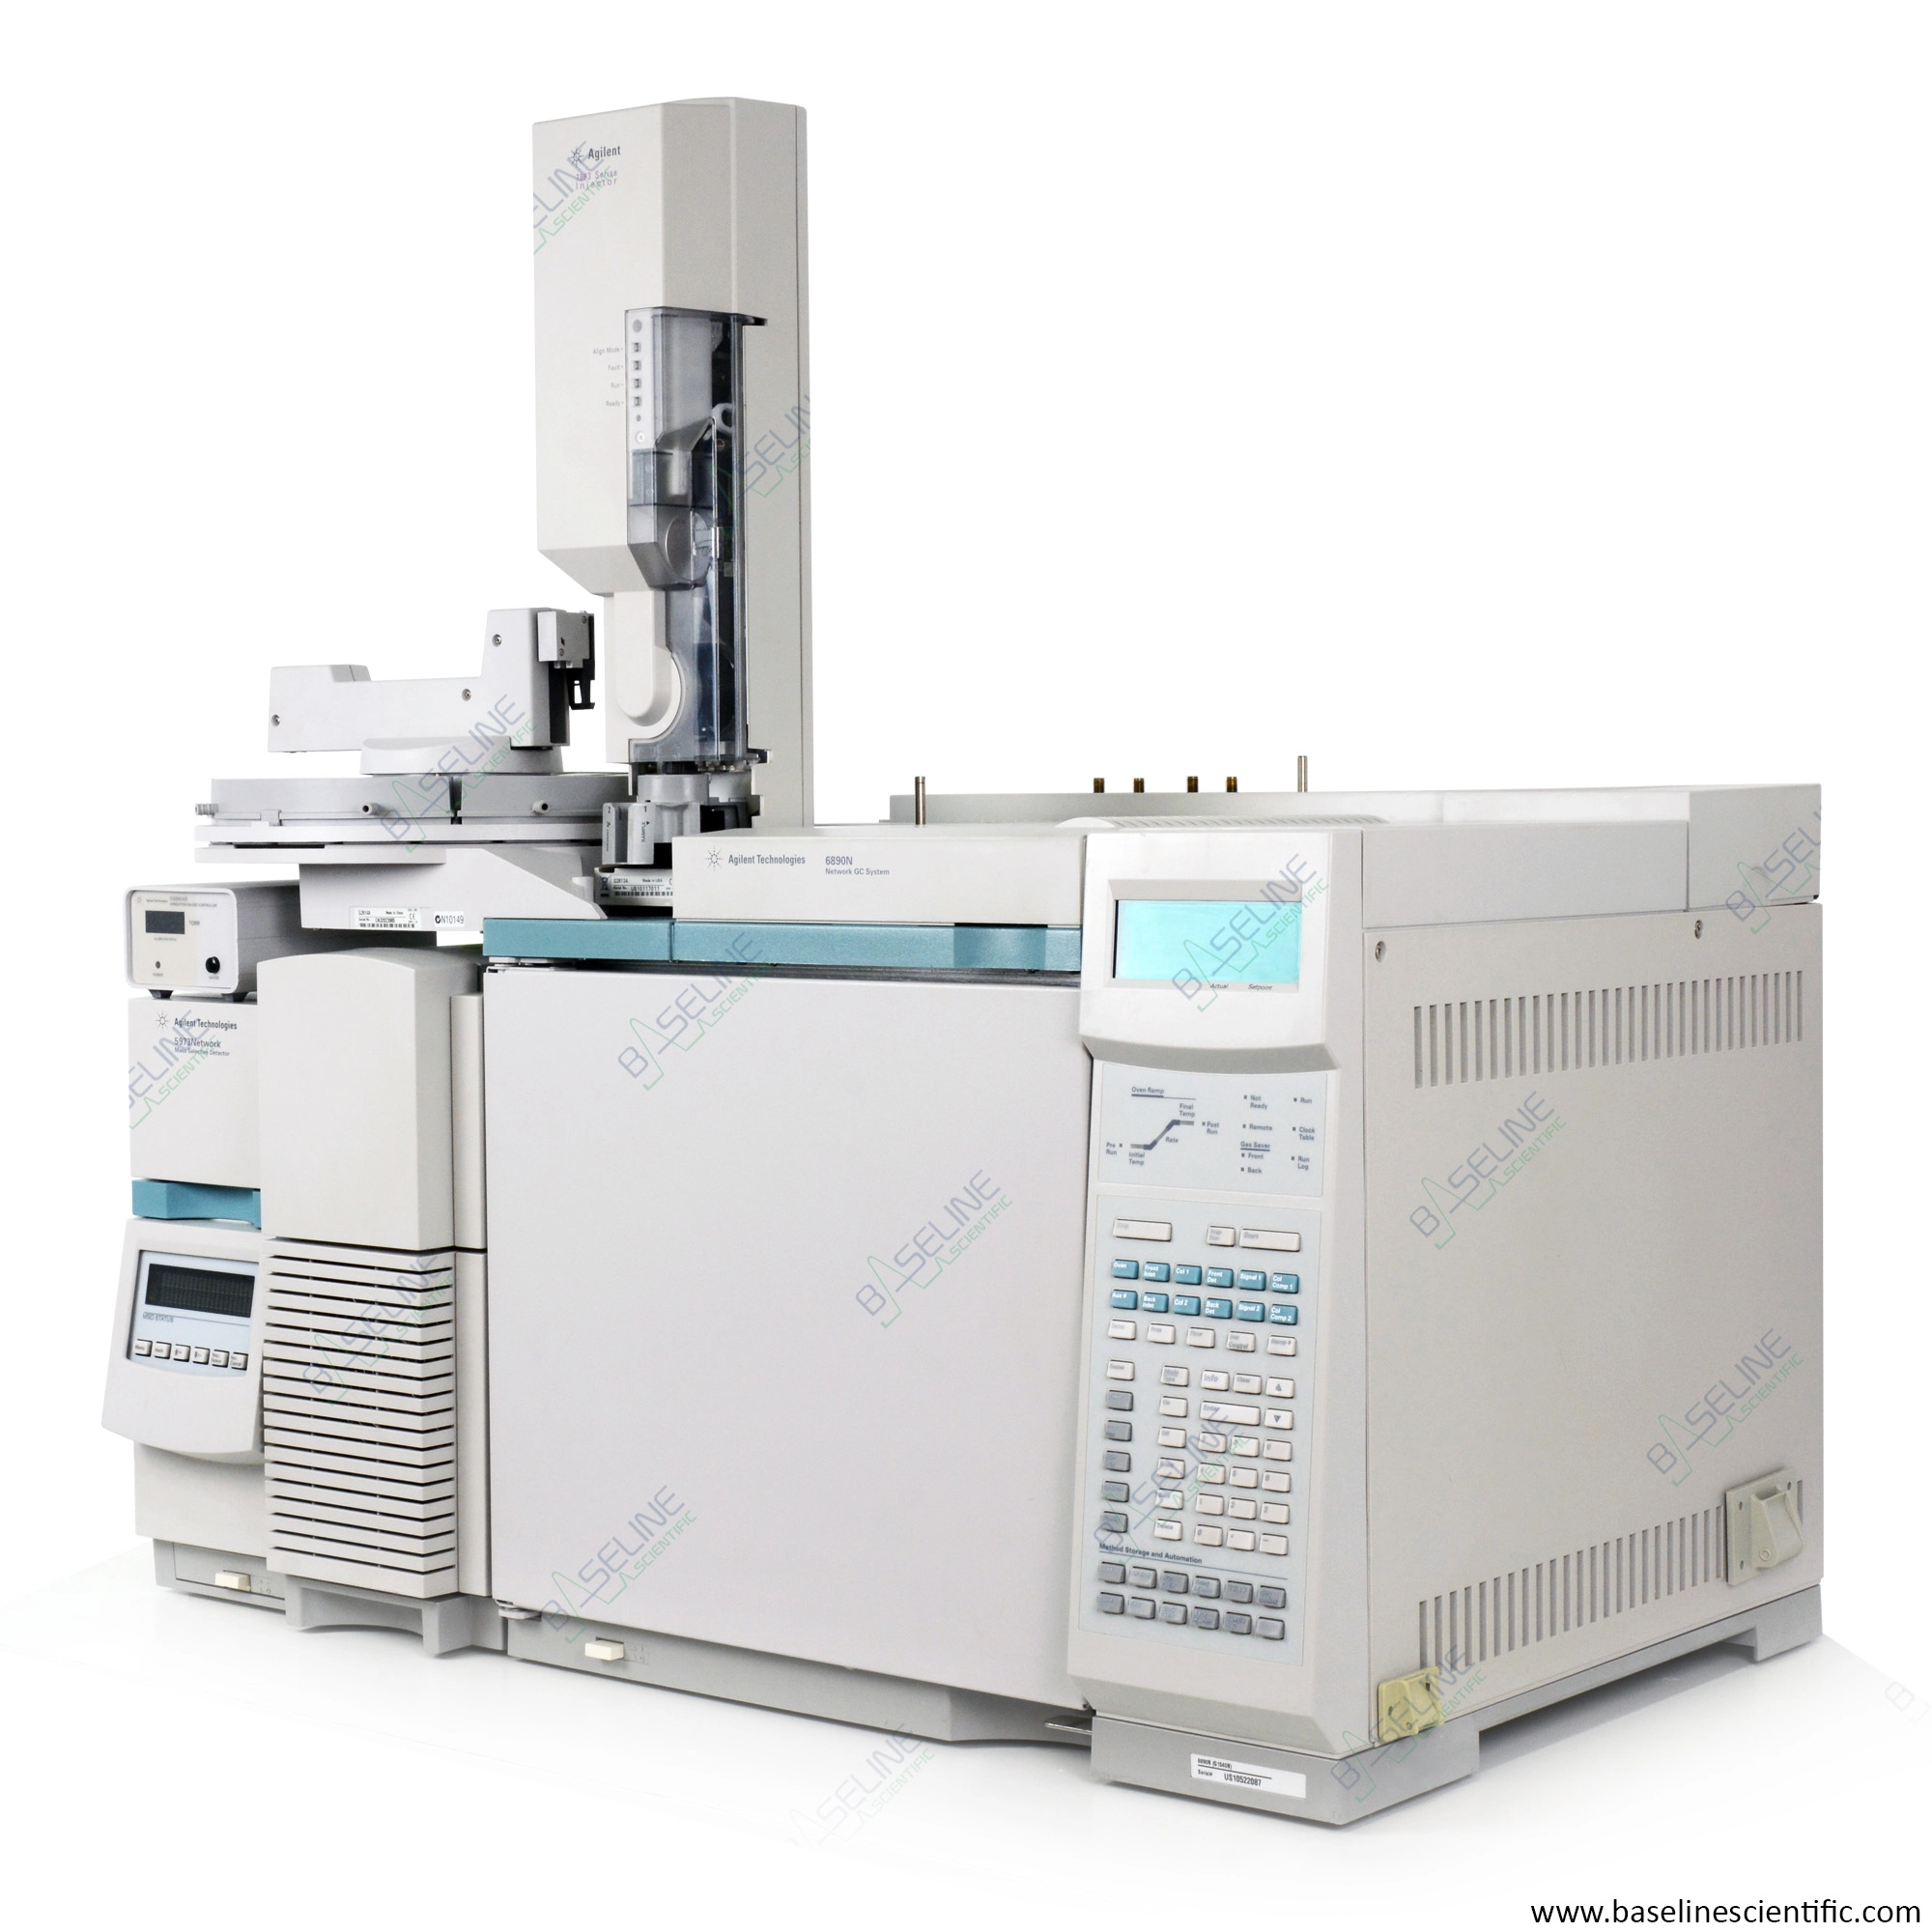 Refurbished Agilent 6890N GC with 5973N MSD Performance Turbo and 7683 Autosampler